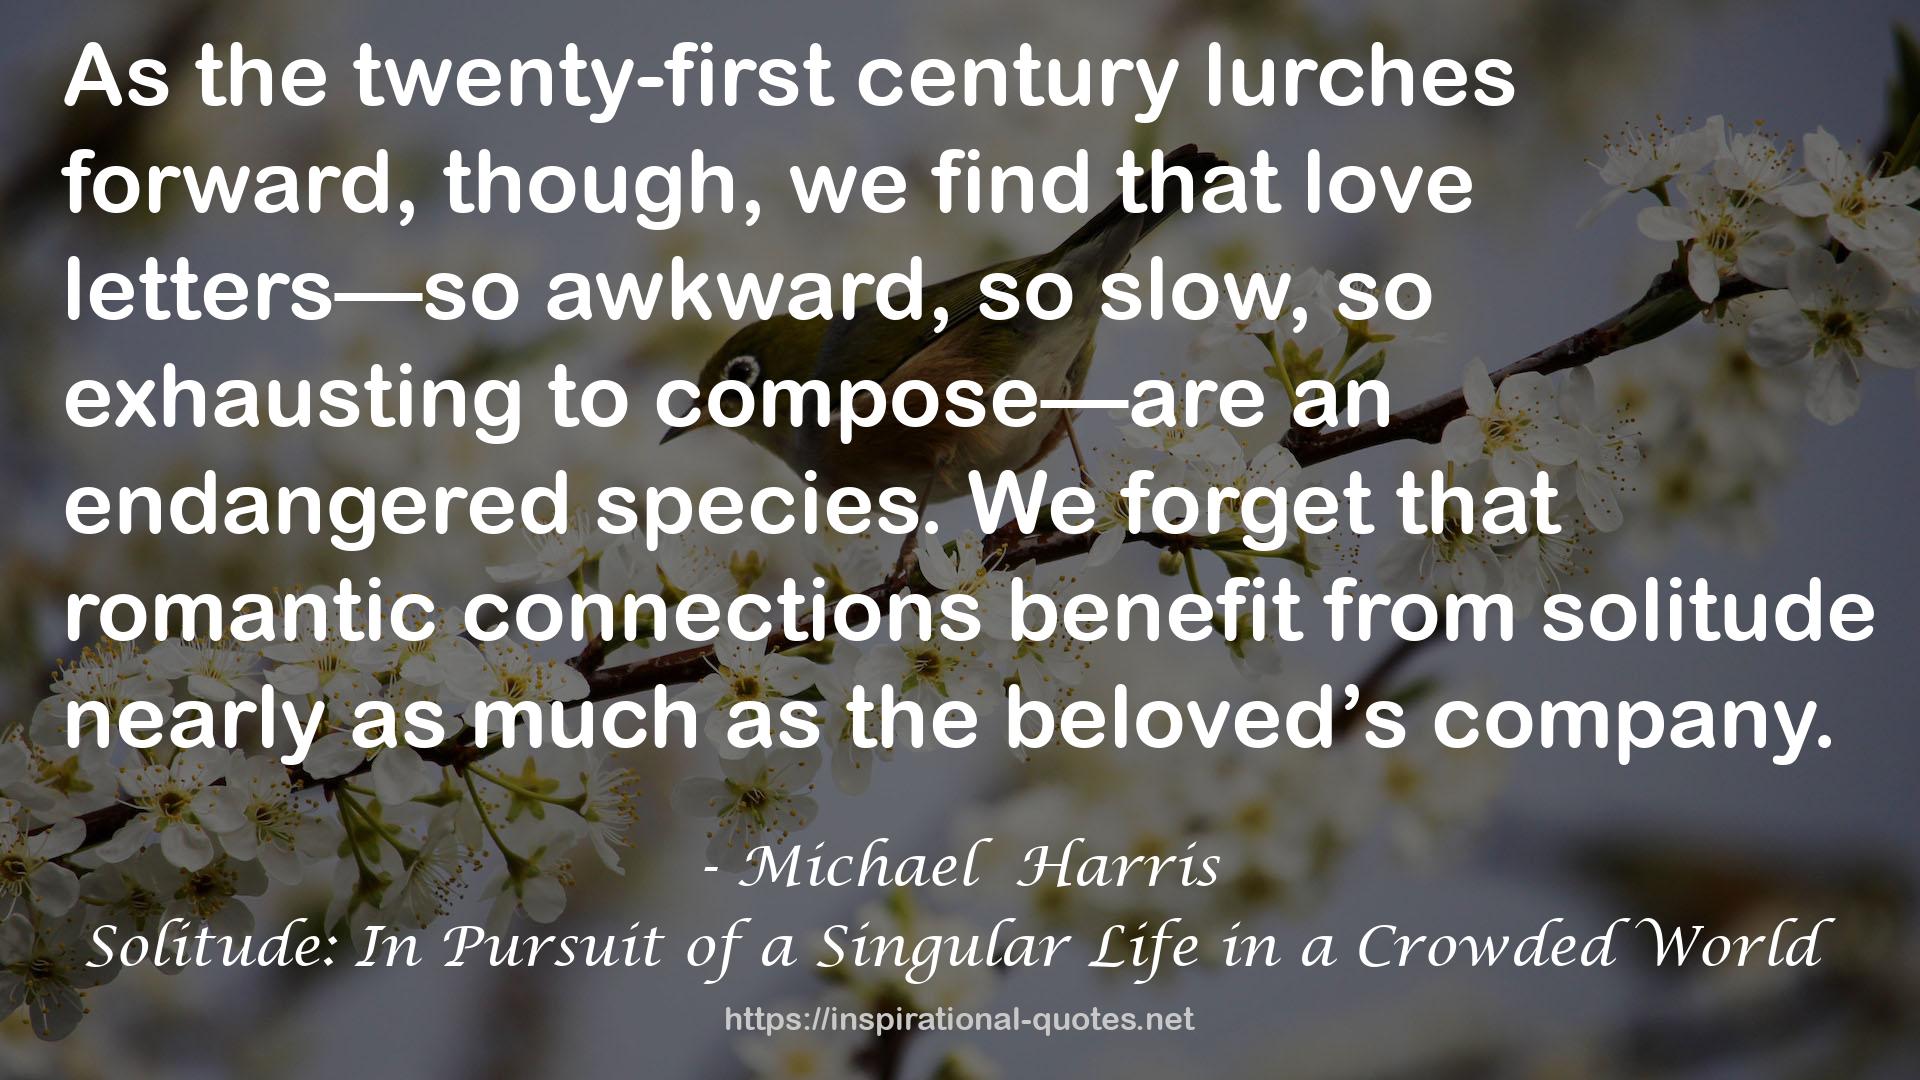 Solitude: In Pursuit of a Singular Life in a Crowded World QUOTES